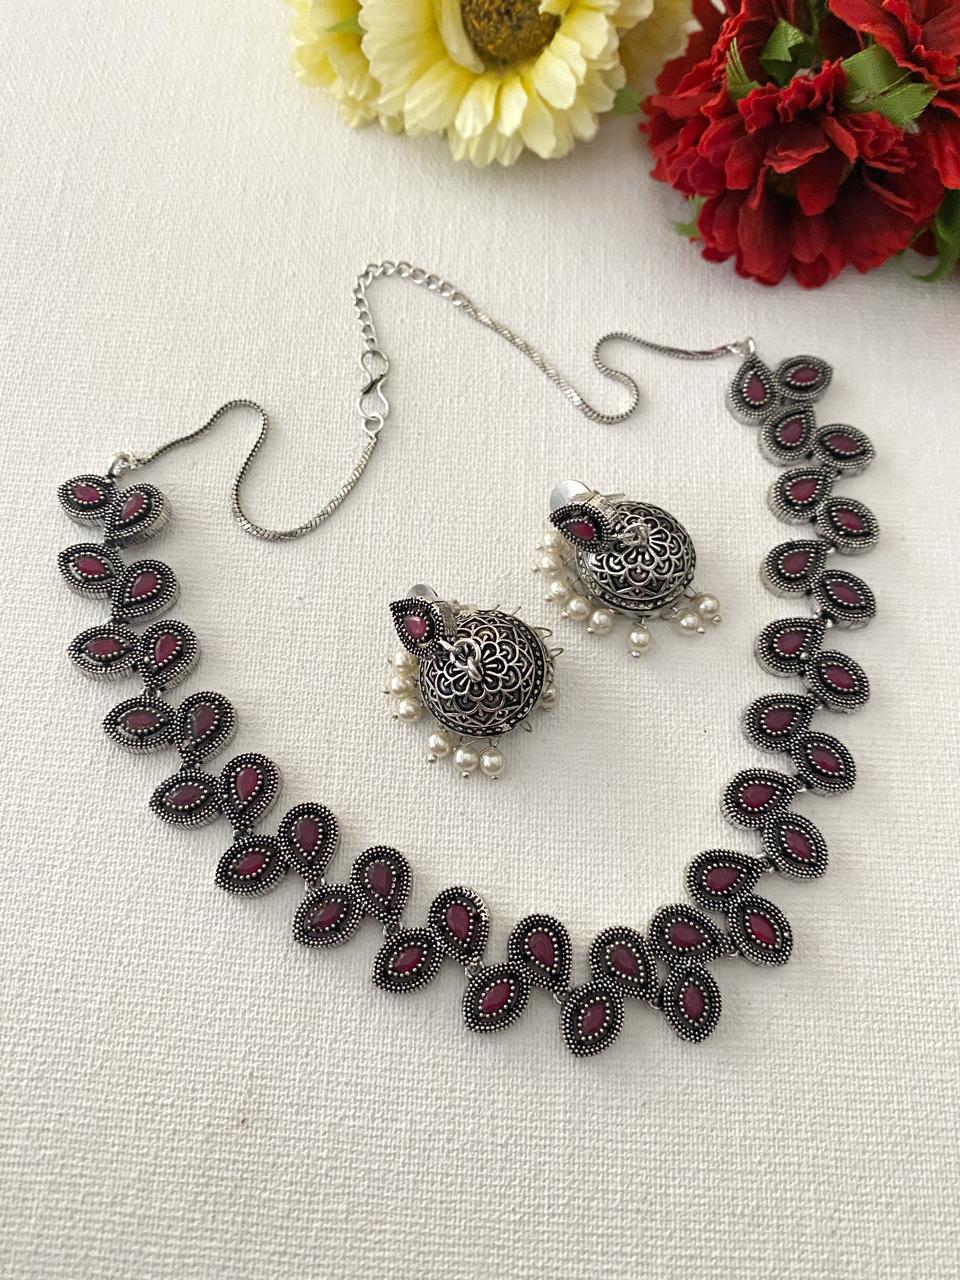 Oxidized Silver Toned Floral Handcrafted Necklace Set For Women Oxidised Necklace Set